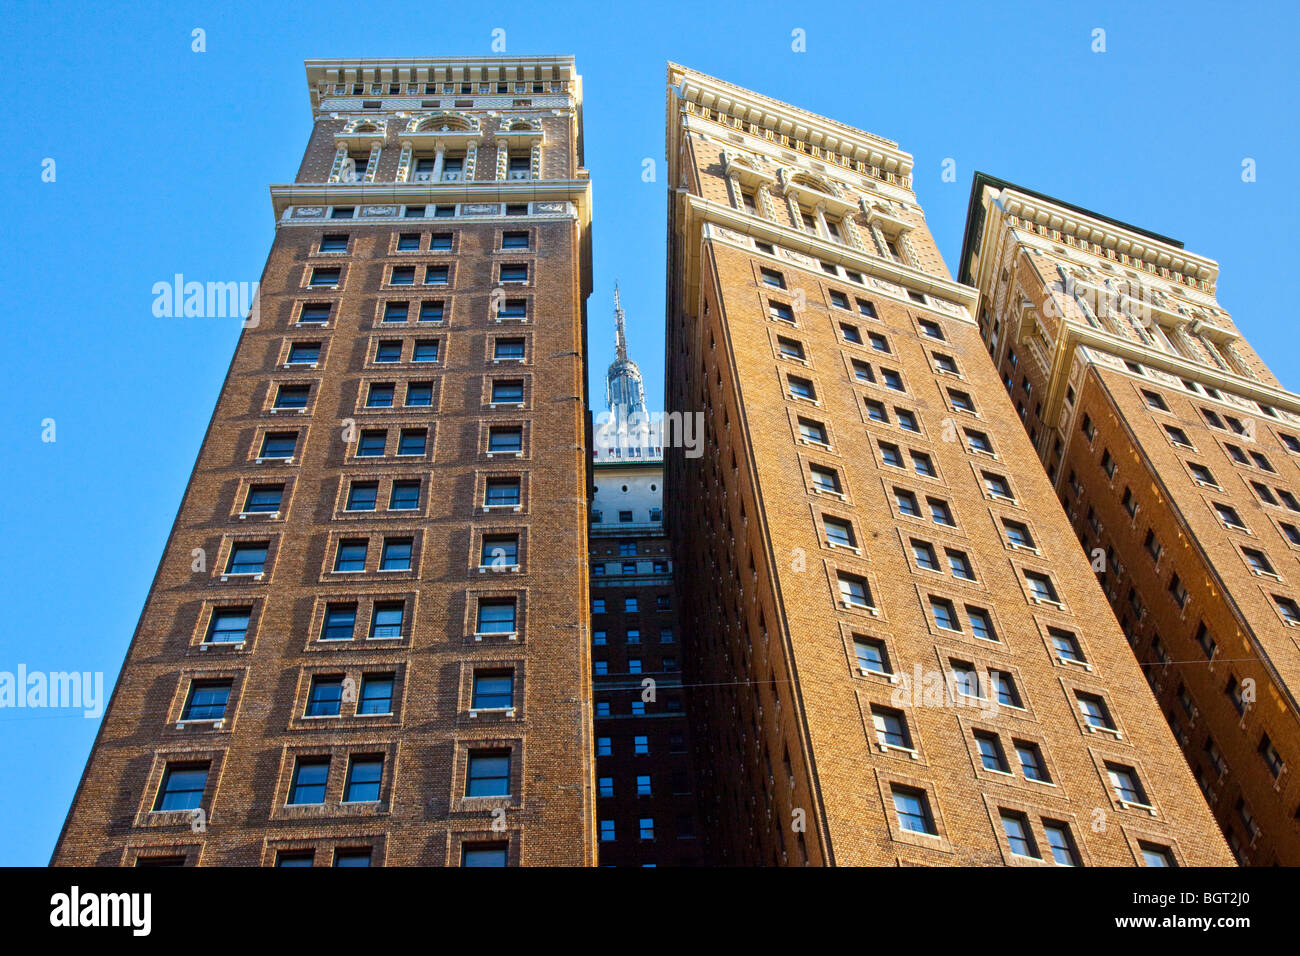 Tip of Empire State Building behind a large apartment building in Midtown Manhattan, New York City Stock Photo